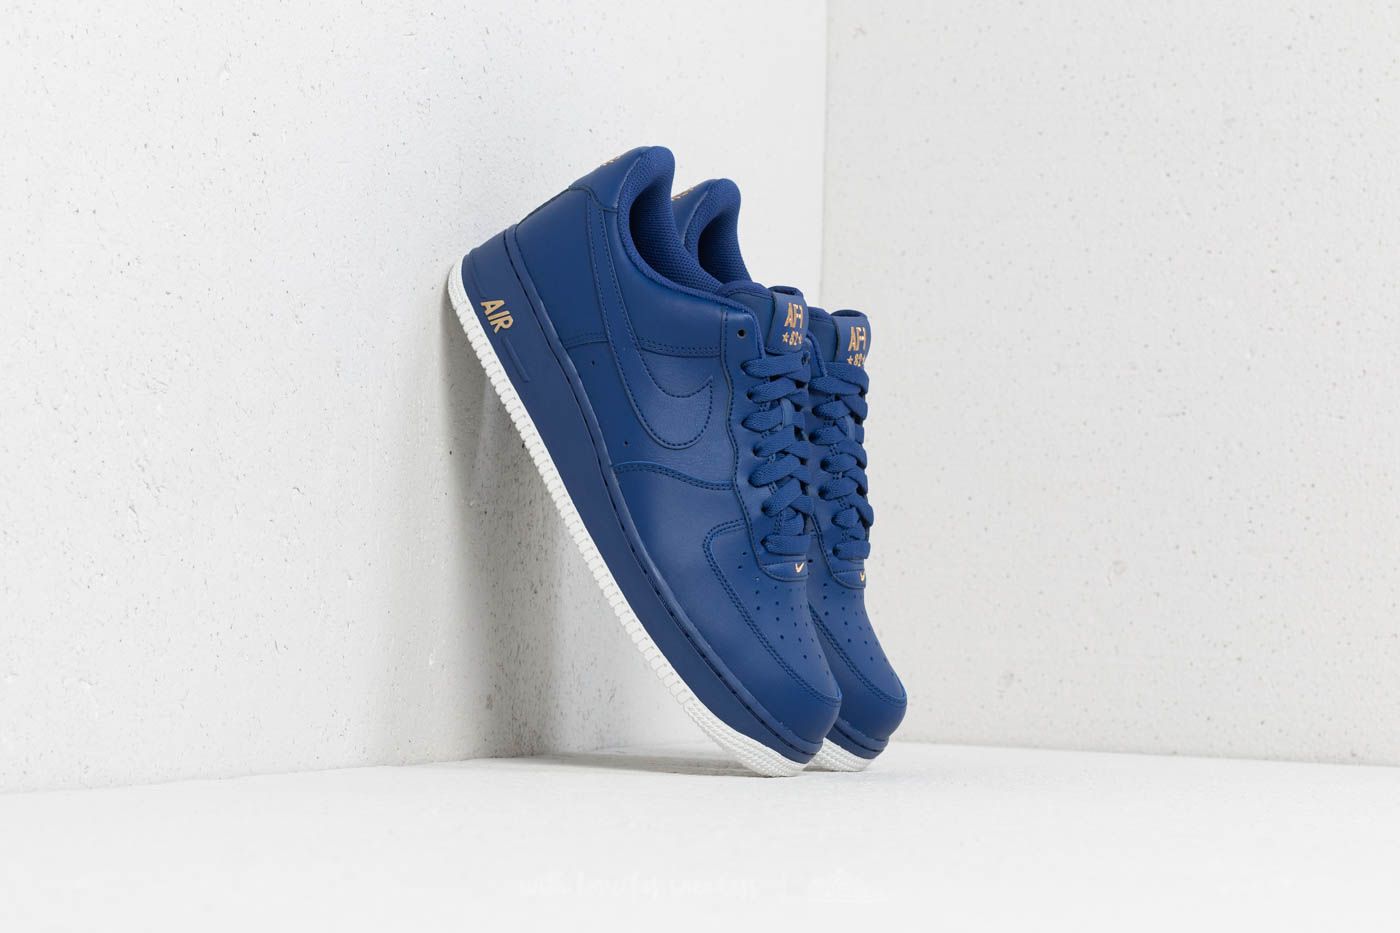 Chaussures et baskets homme Nike Air Force 1 '07 Deep Royal Blue